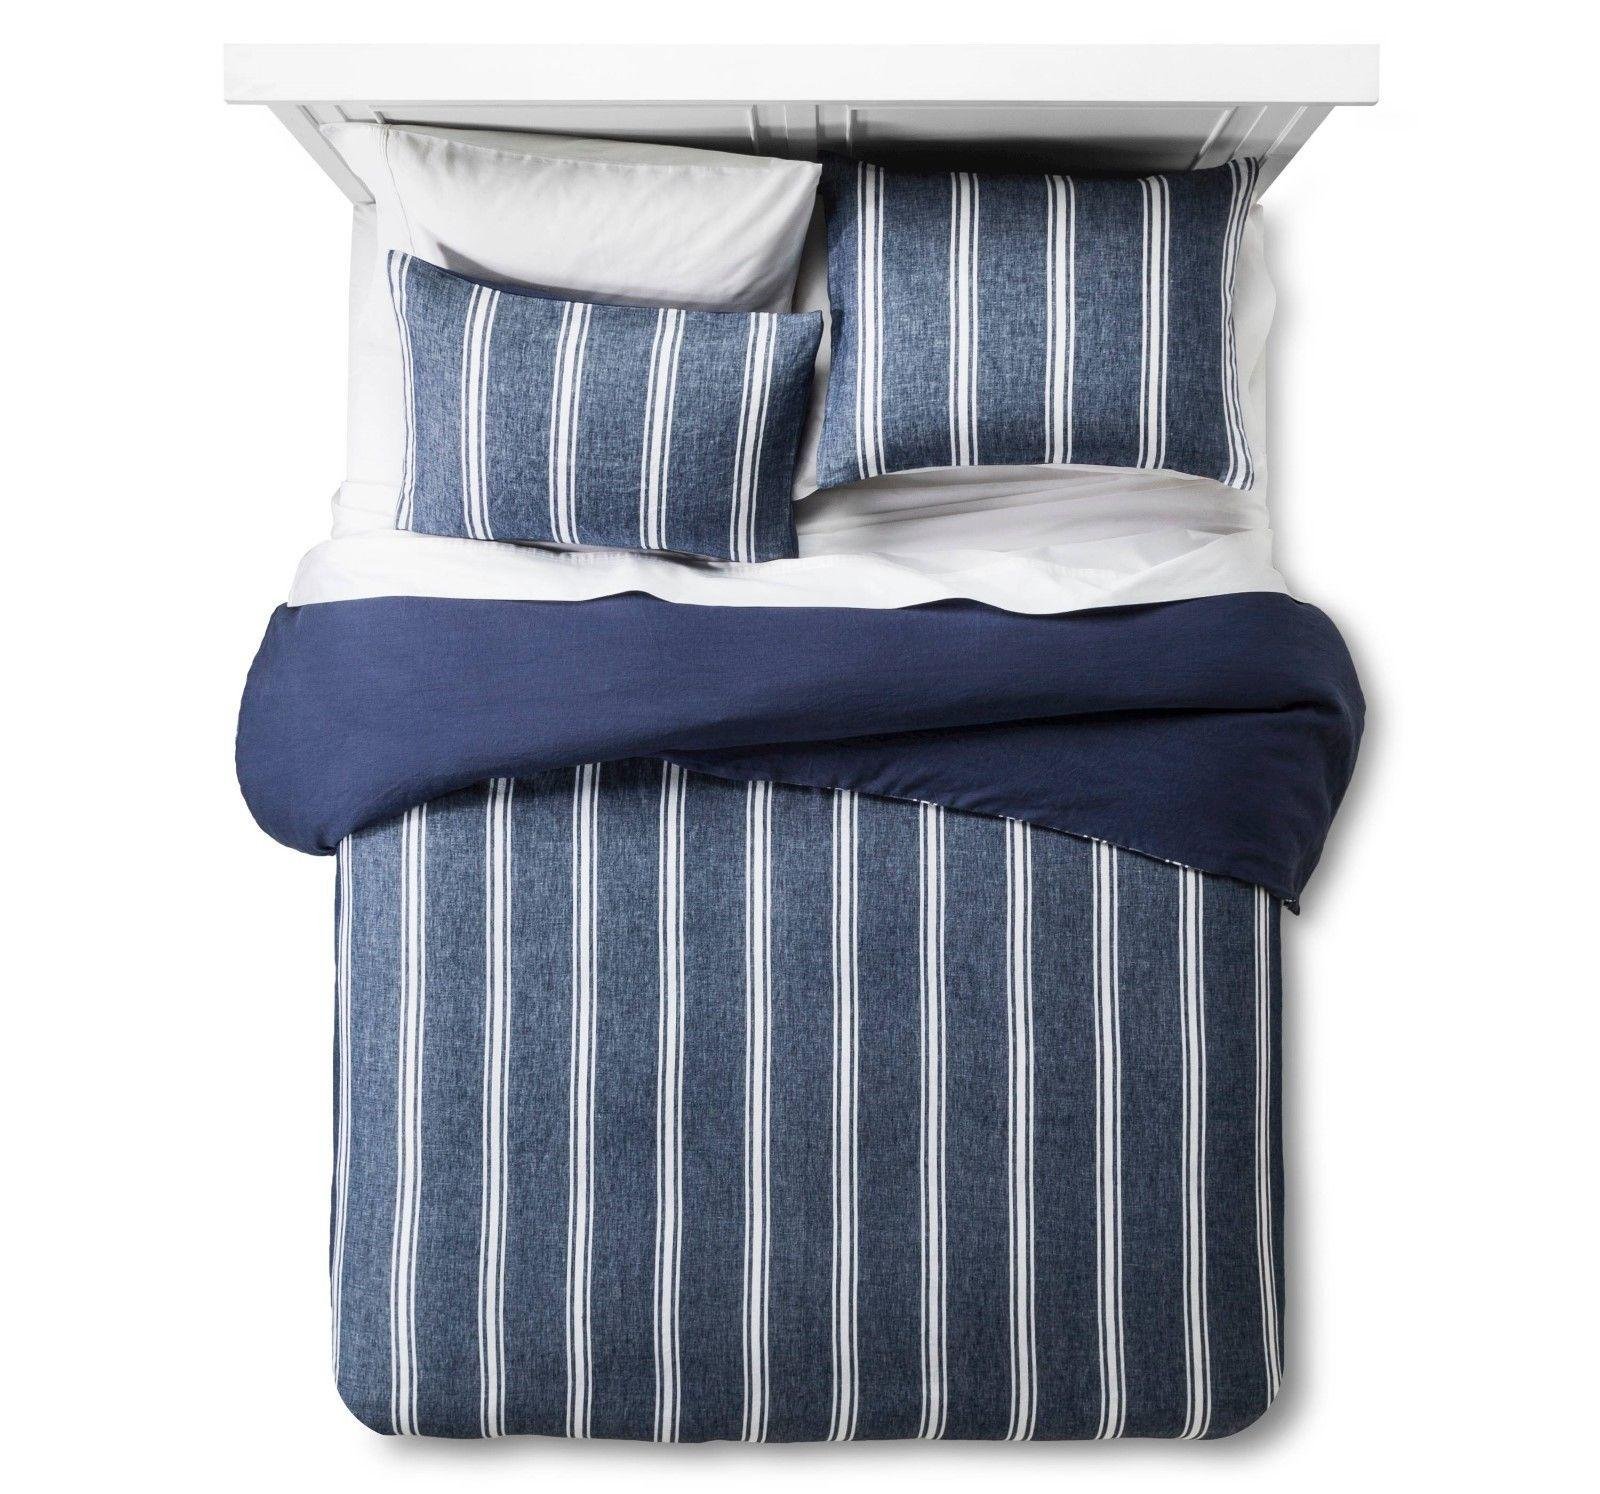 italy style cotton bed linen collection 2